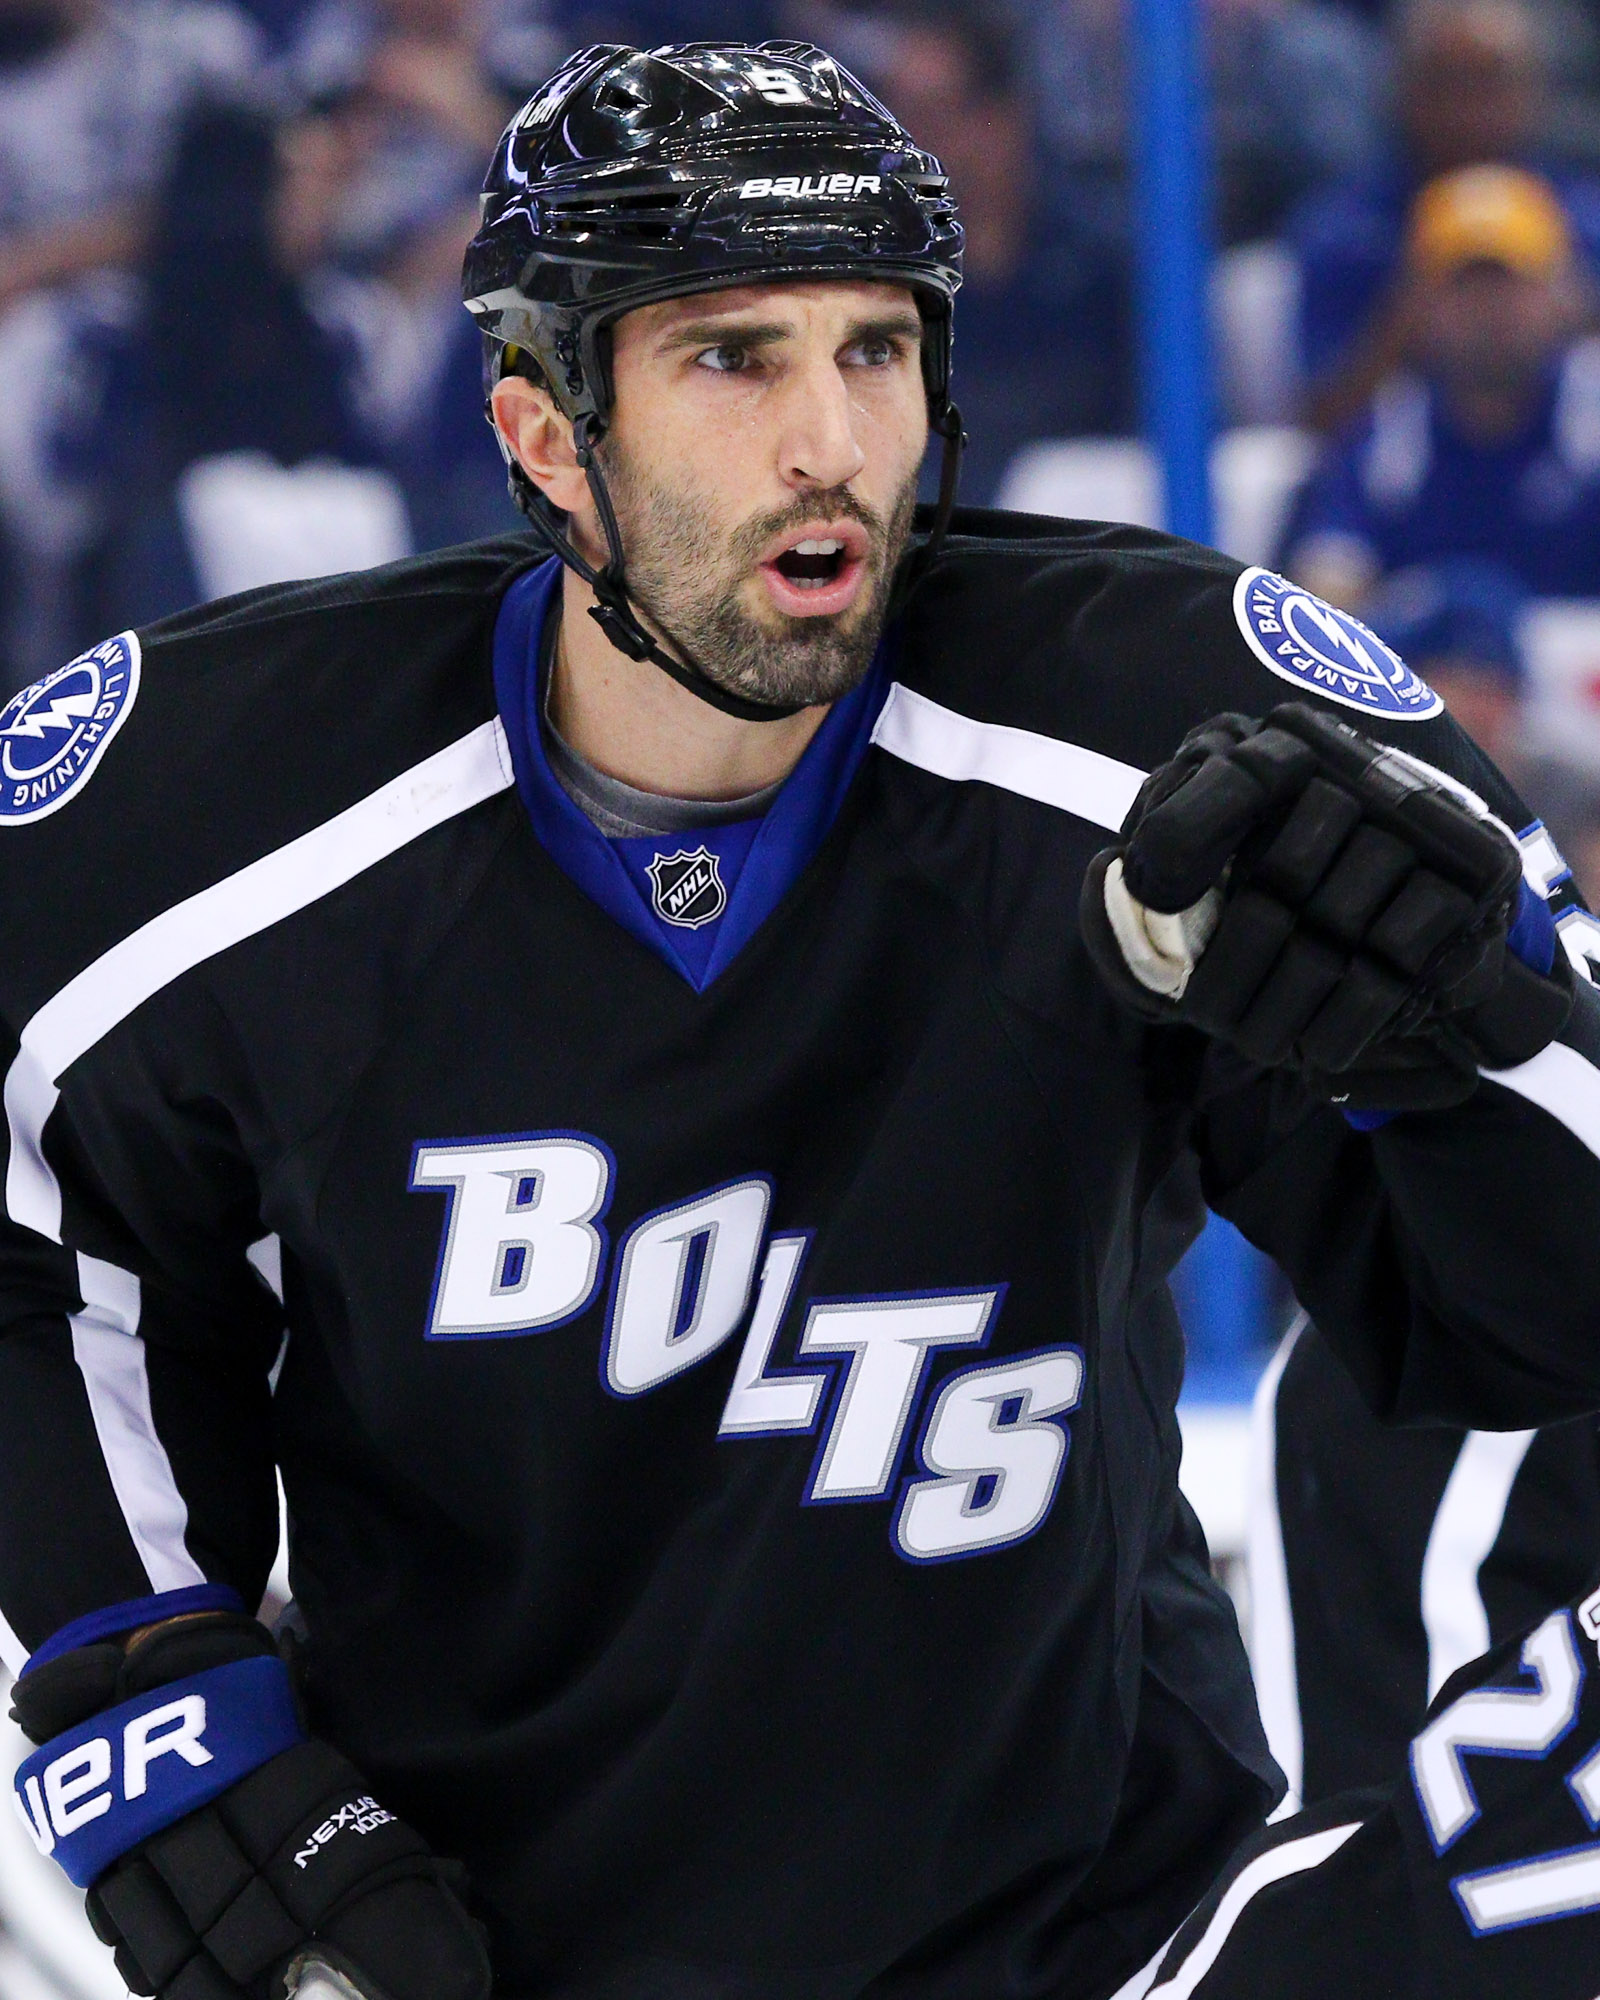 Jason Garrison and the defense held the Kings to nine shots the final 40 minutes./ANDREW J. KRAMER